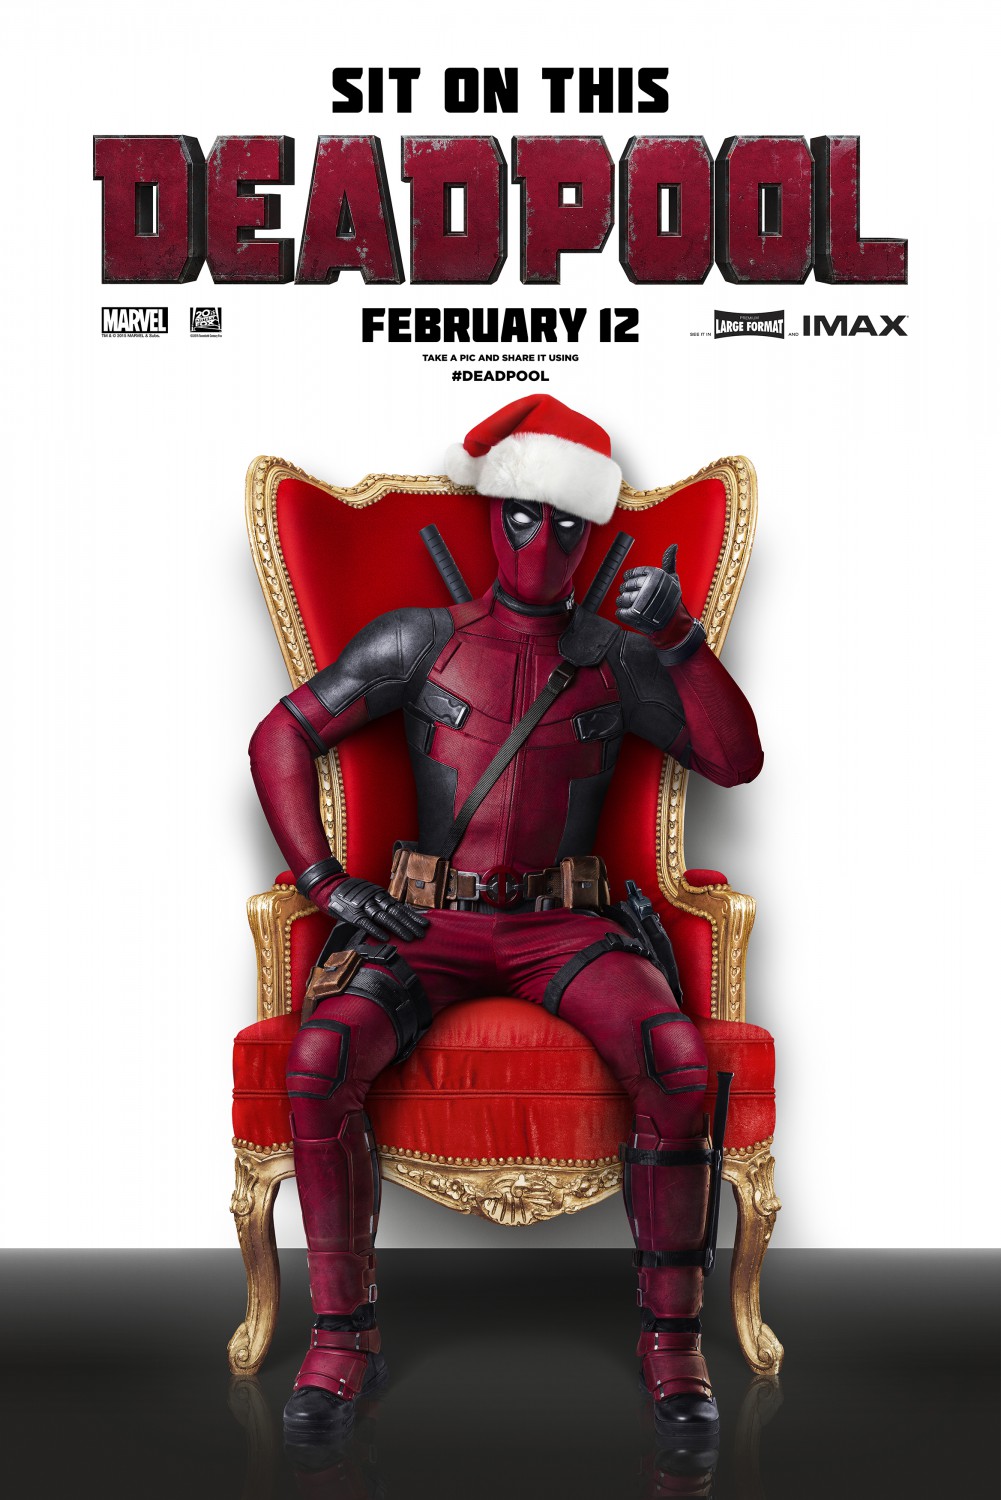 Extra Large Movie Poster Image for Deadpool (#2 of 15)